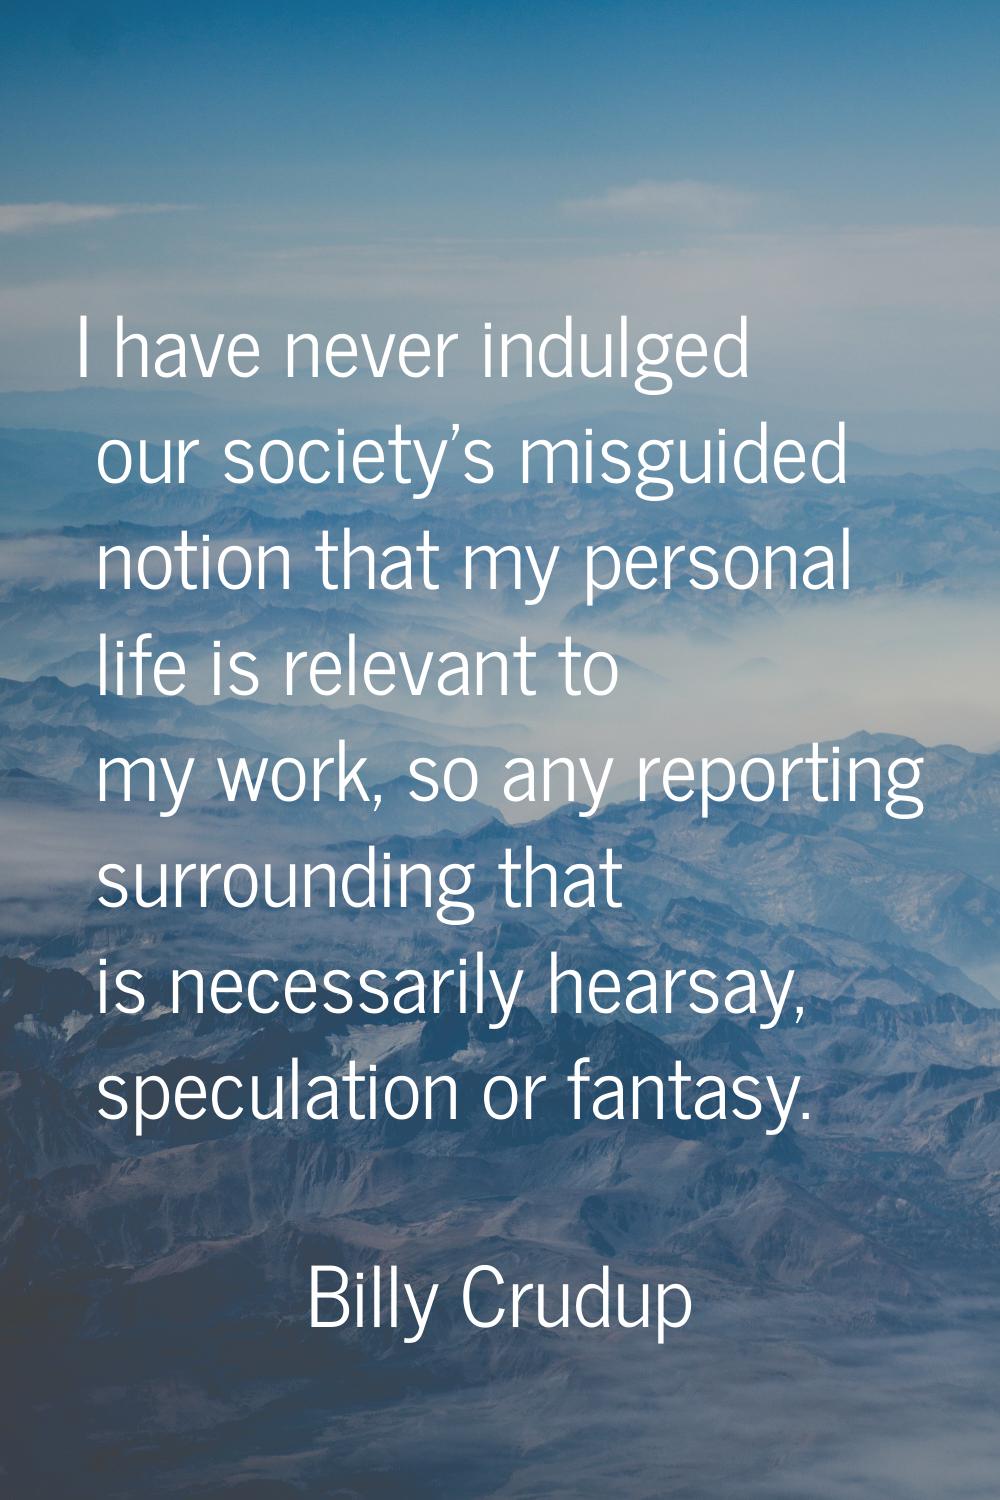 I have never indulged our society's misguided notion that my personal life is relevant to my work, 